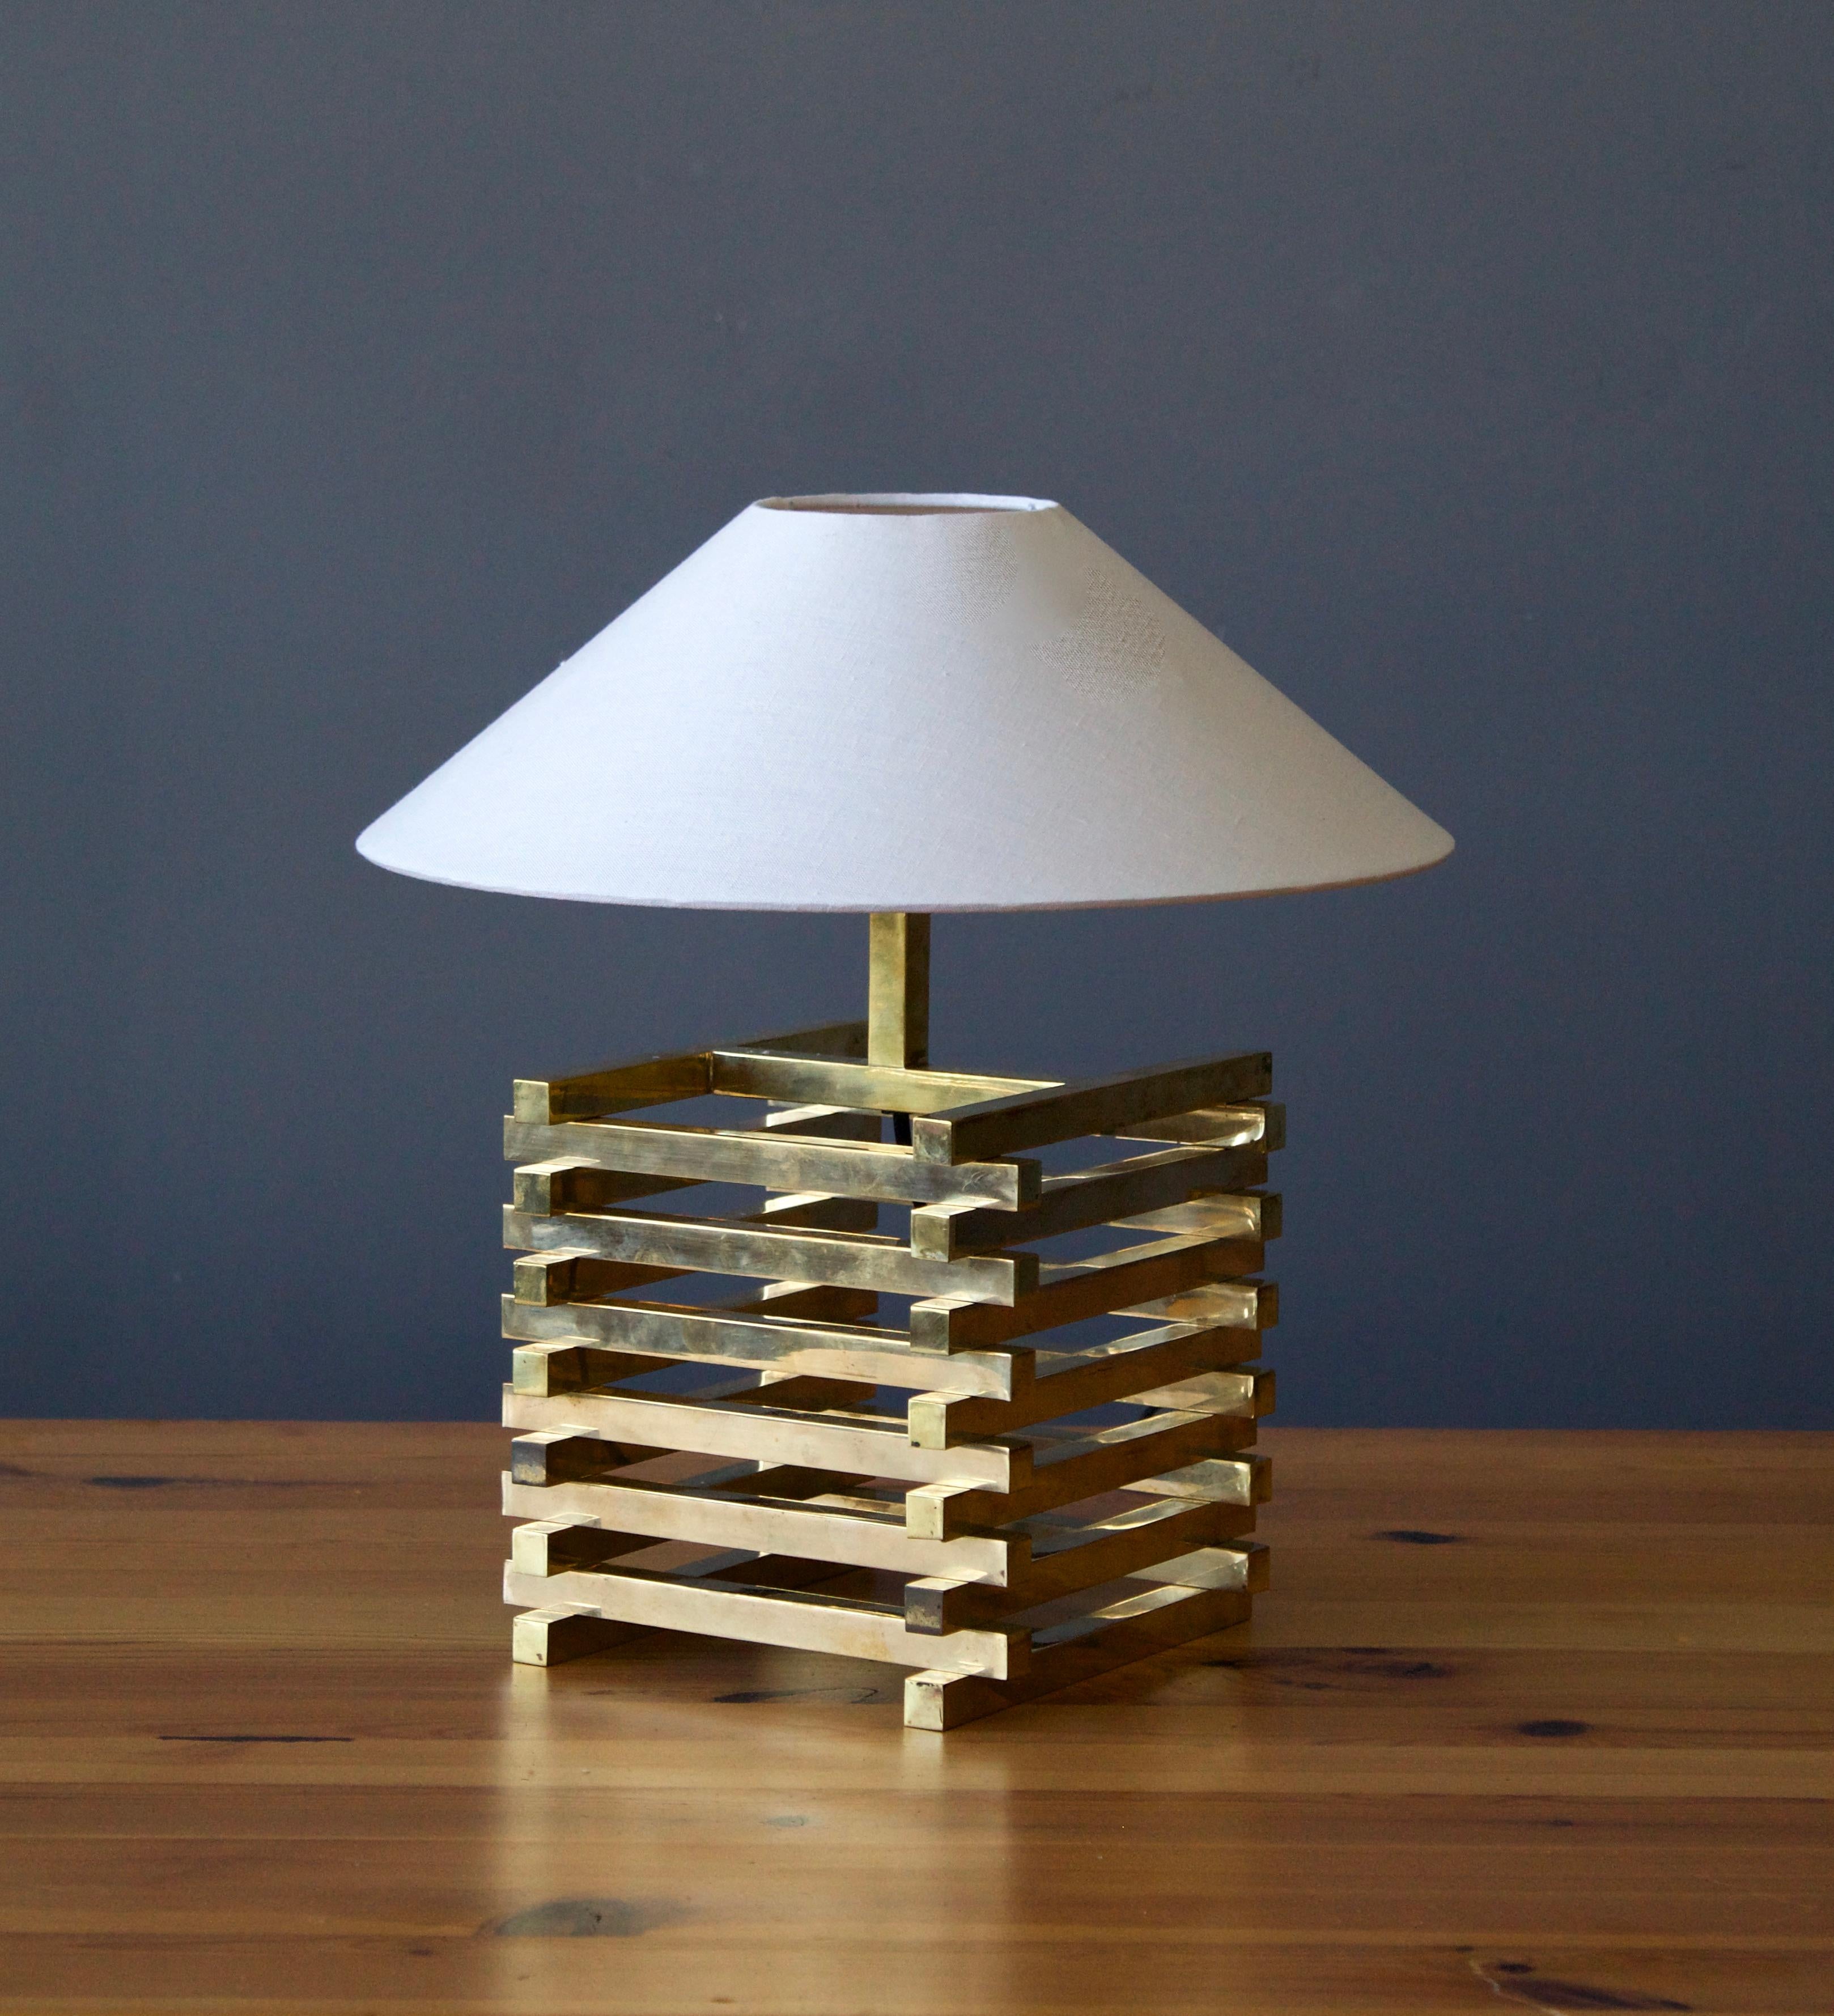 A table lamp, designed and produced in Italy, 1970s. In brass. 

Stated dimensions exclude lampshade, height includes socket. Sold without lampshades.

Other designers of the period include Gabriella Crespi, Donald Judd, Max Ingrand, Fontana